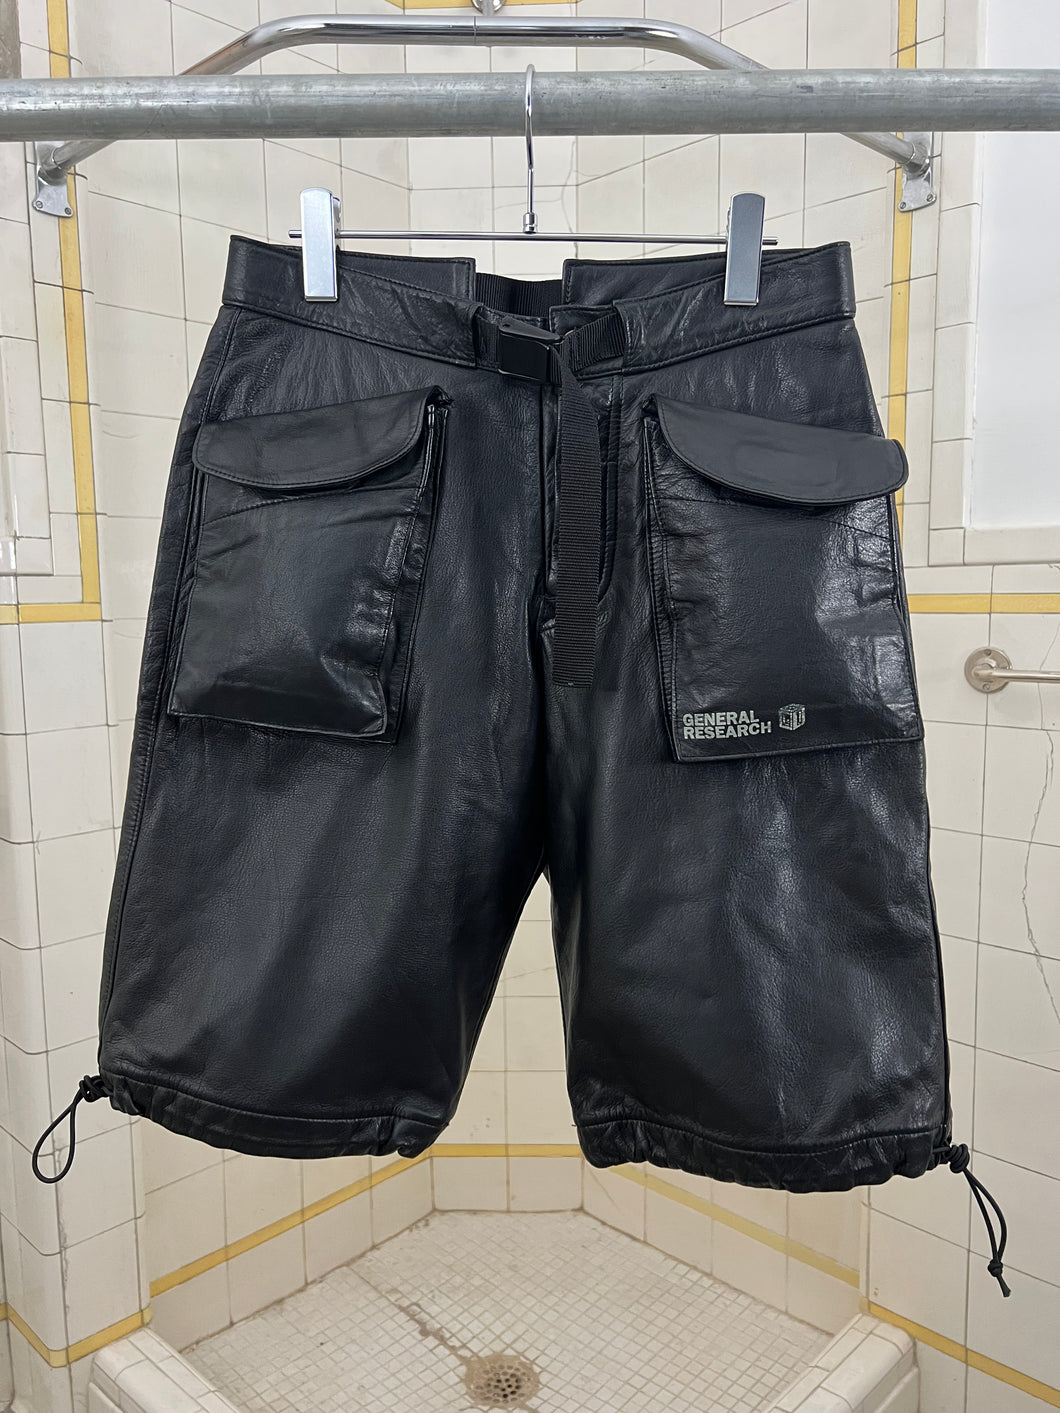 1997 General Research Leather Cargo Short - Size M